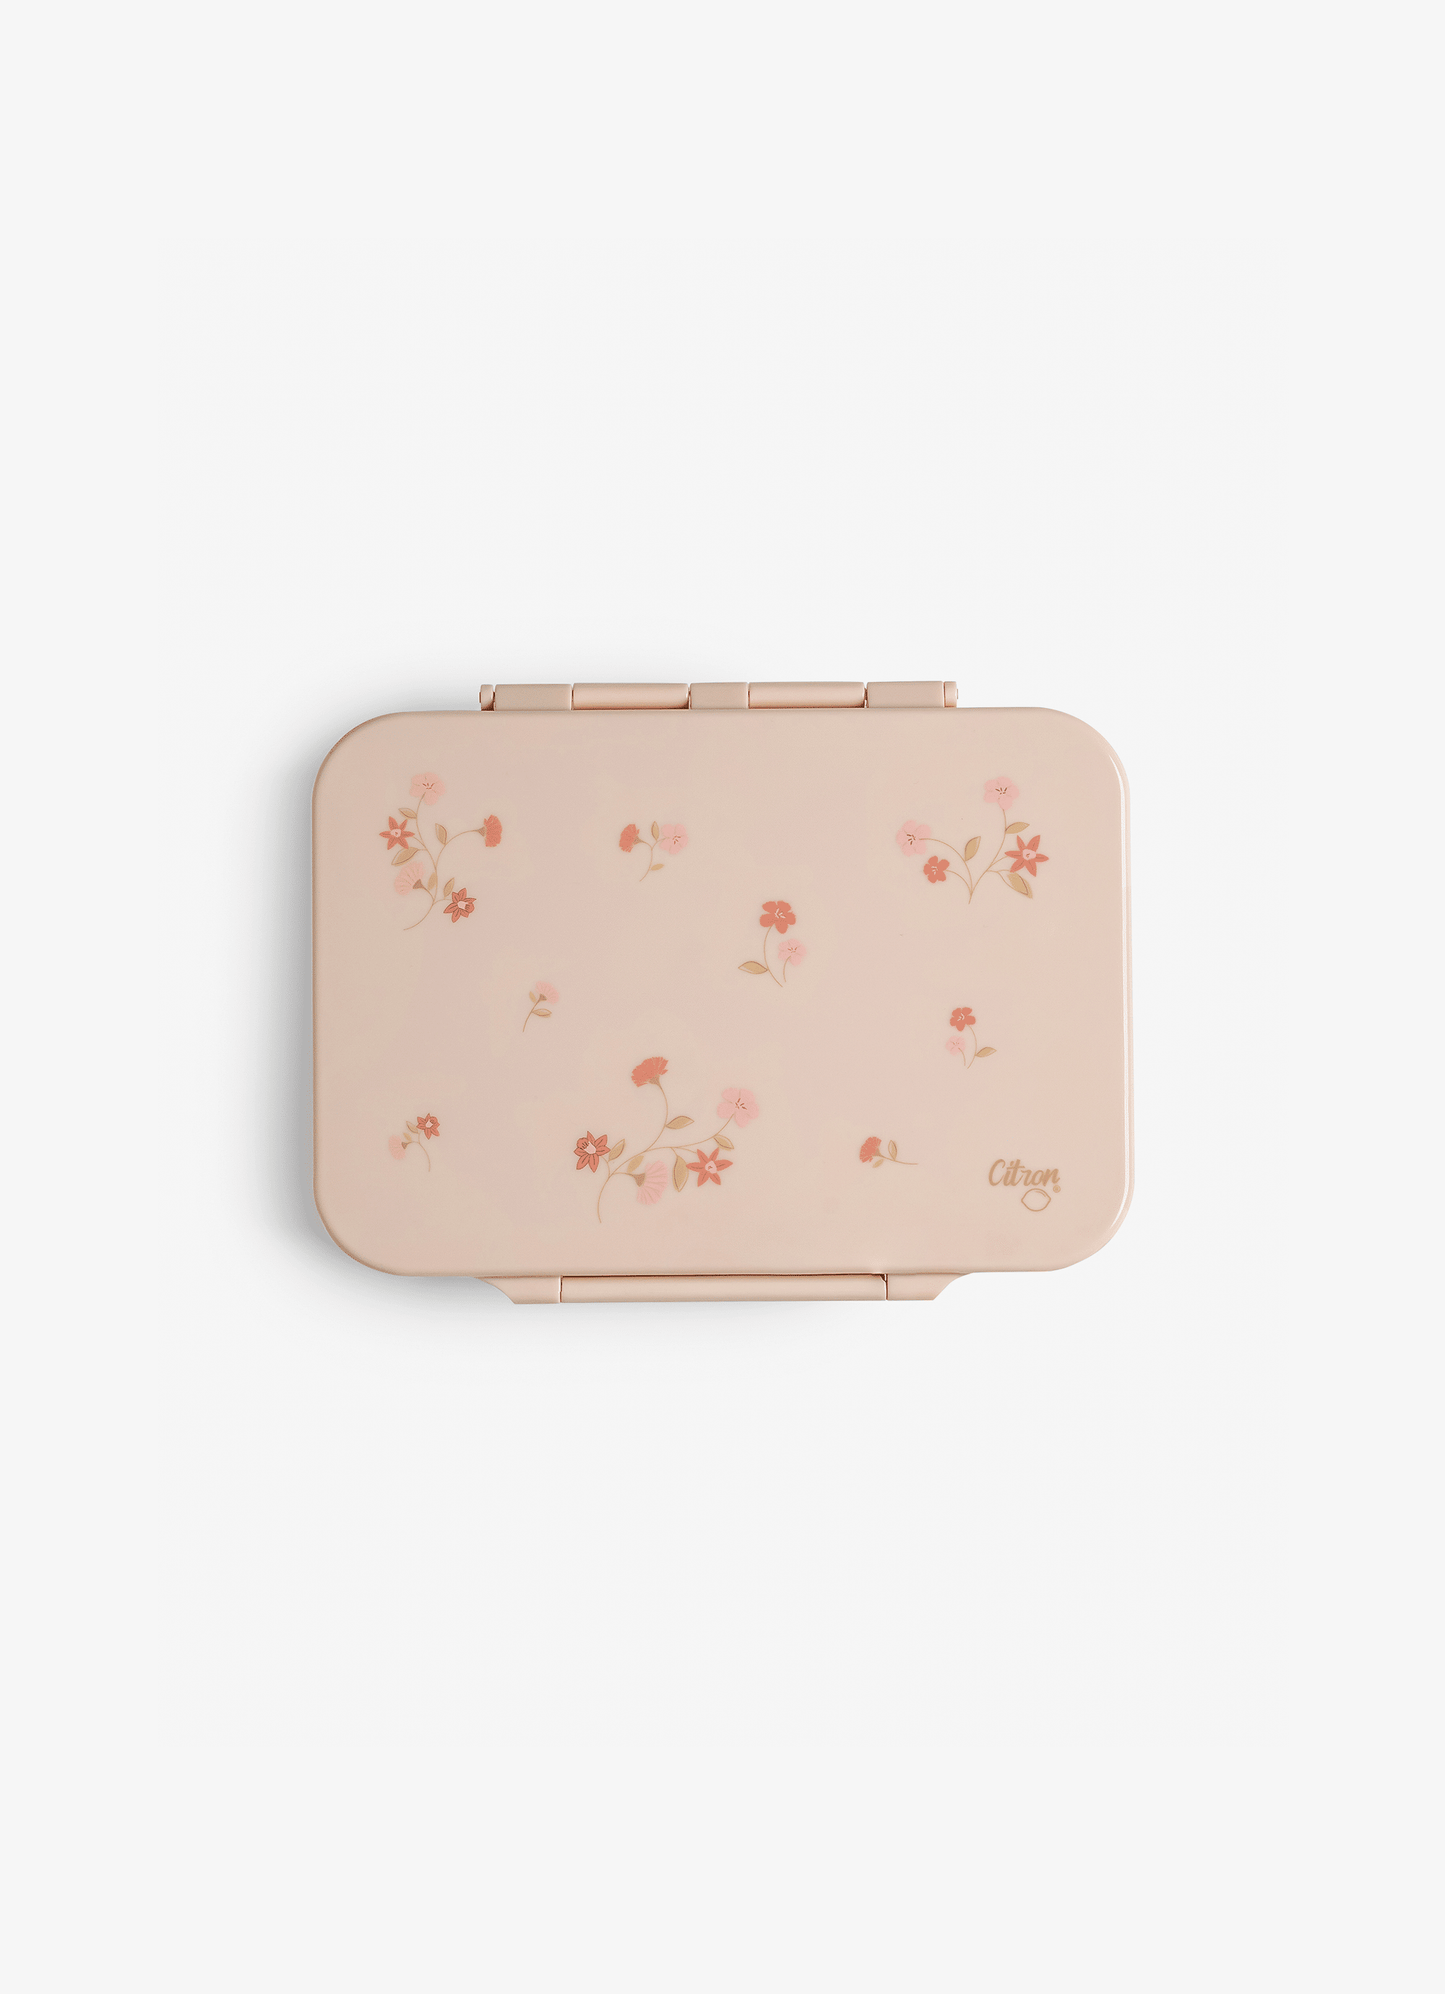 Tritan Lunch Box - 4 Compartments - Flowers